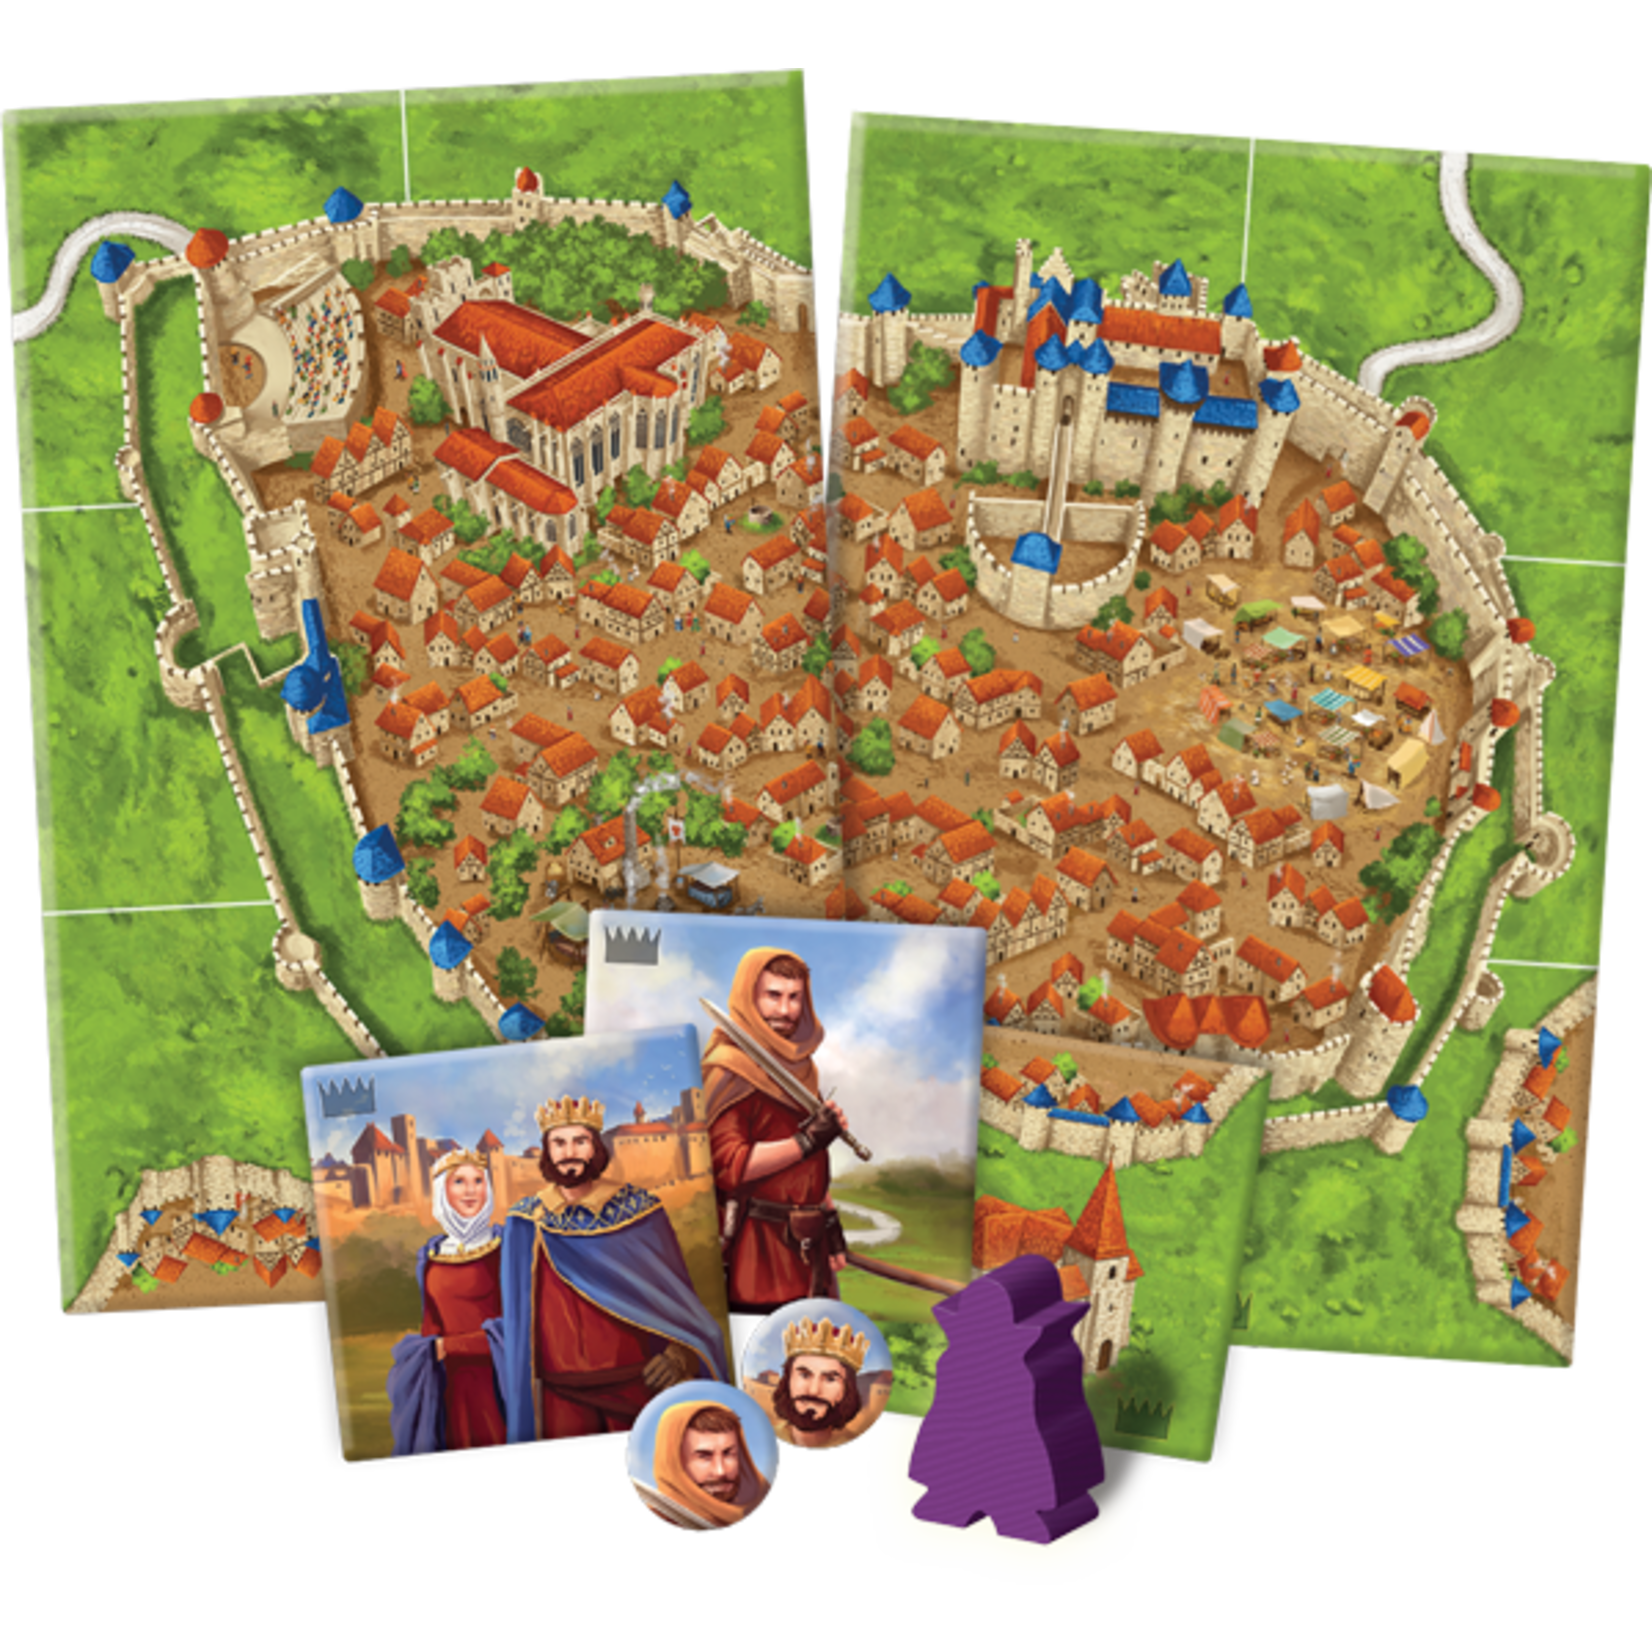 Z-Man Games Carcassonne: Count, King, & Robber